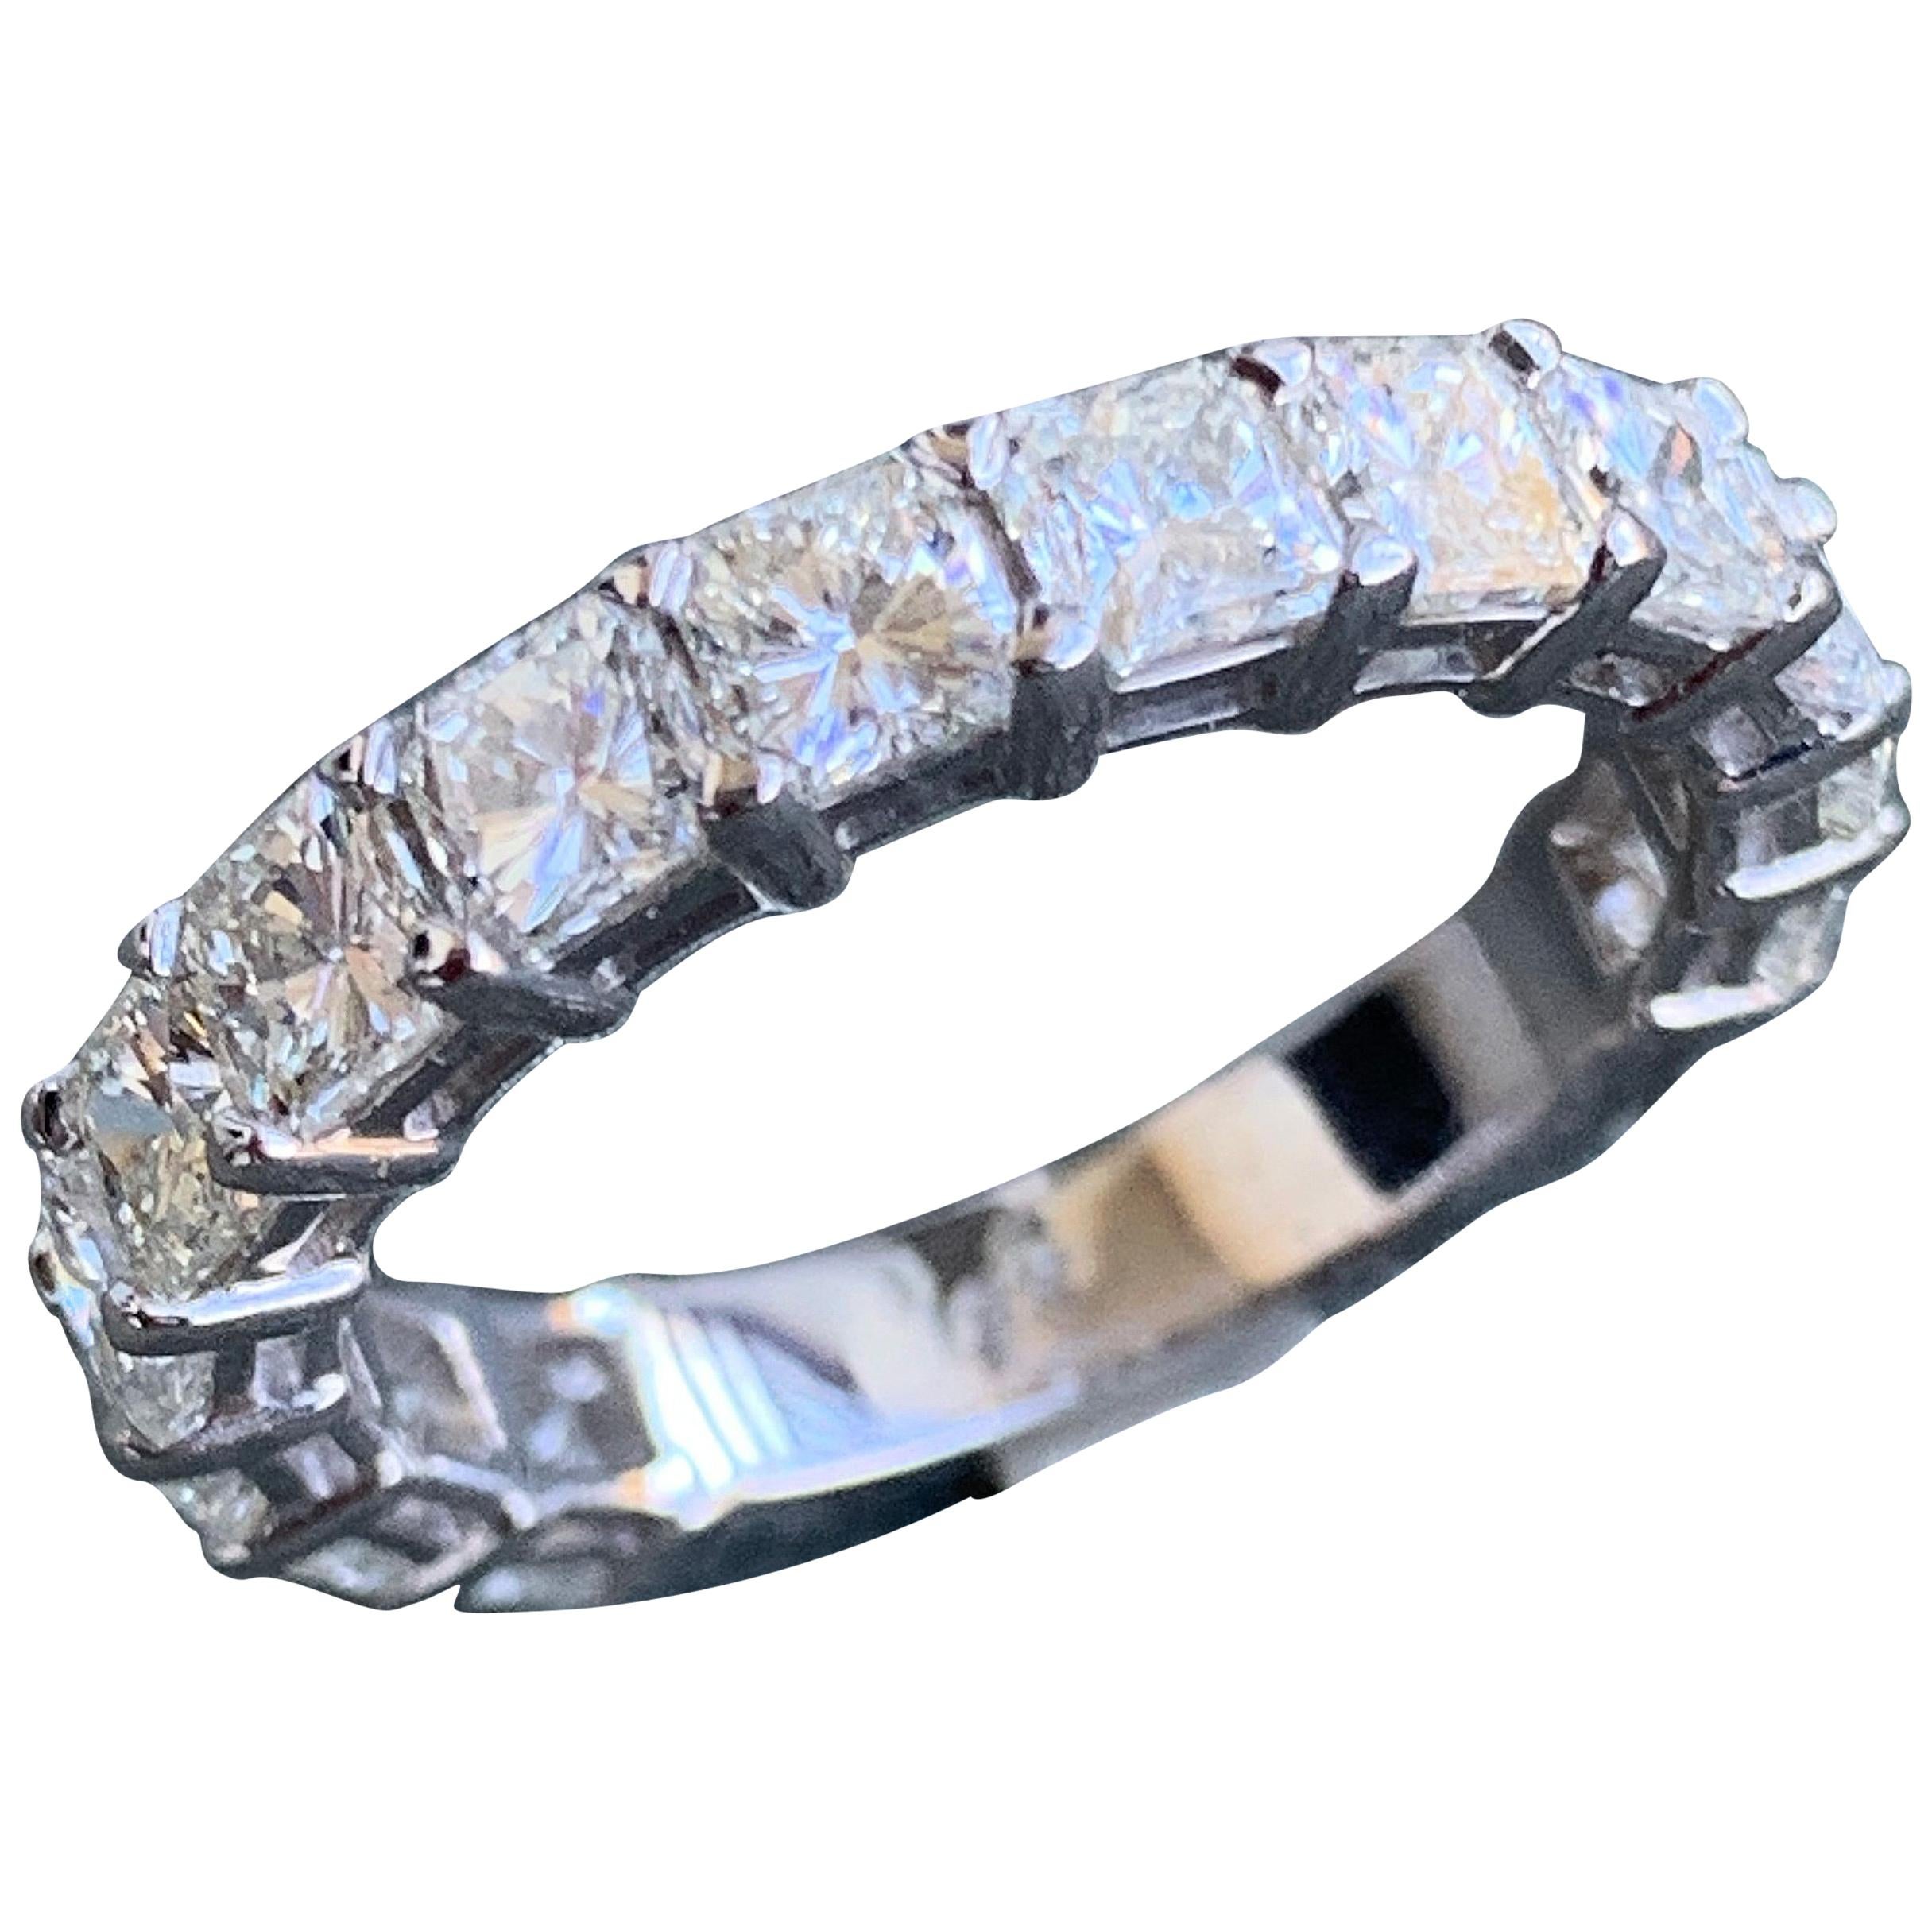 2.25 Carat Approximate Radiant Diamond Eternity Ring or Wedding Band, Ben Dannie